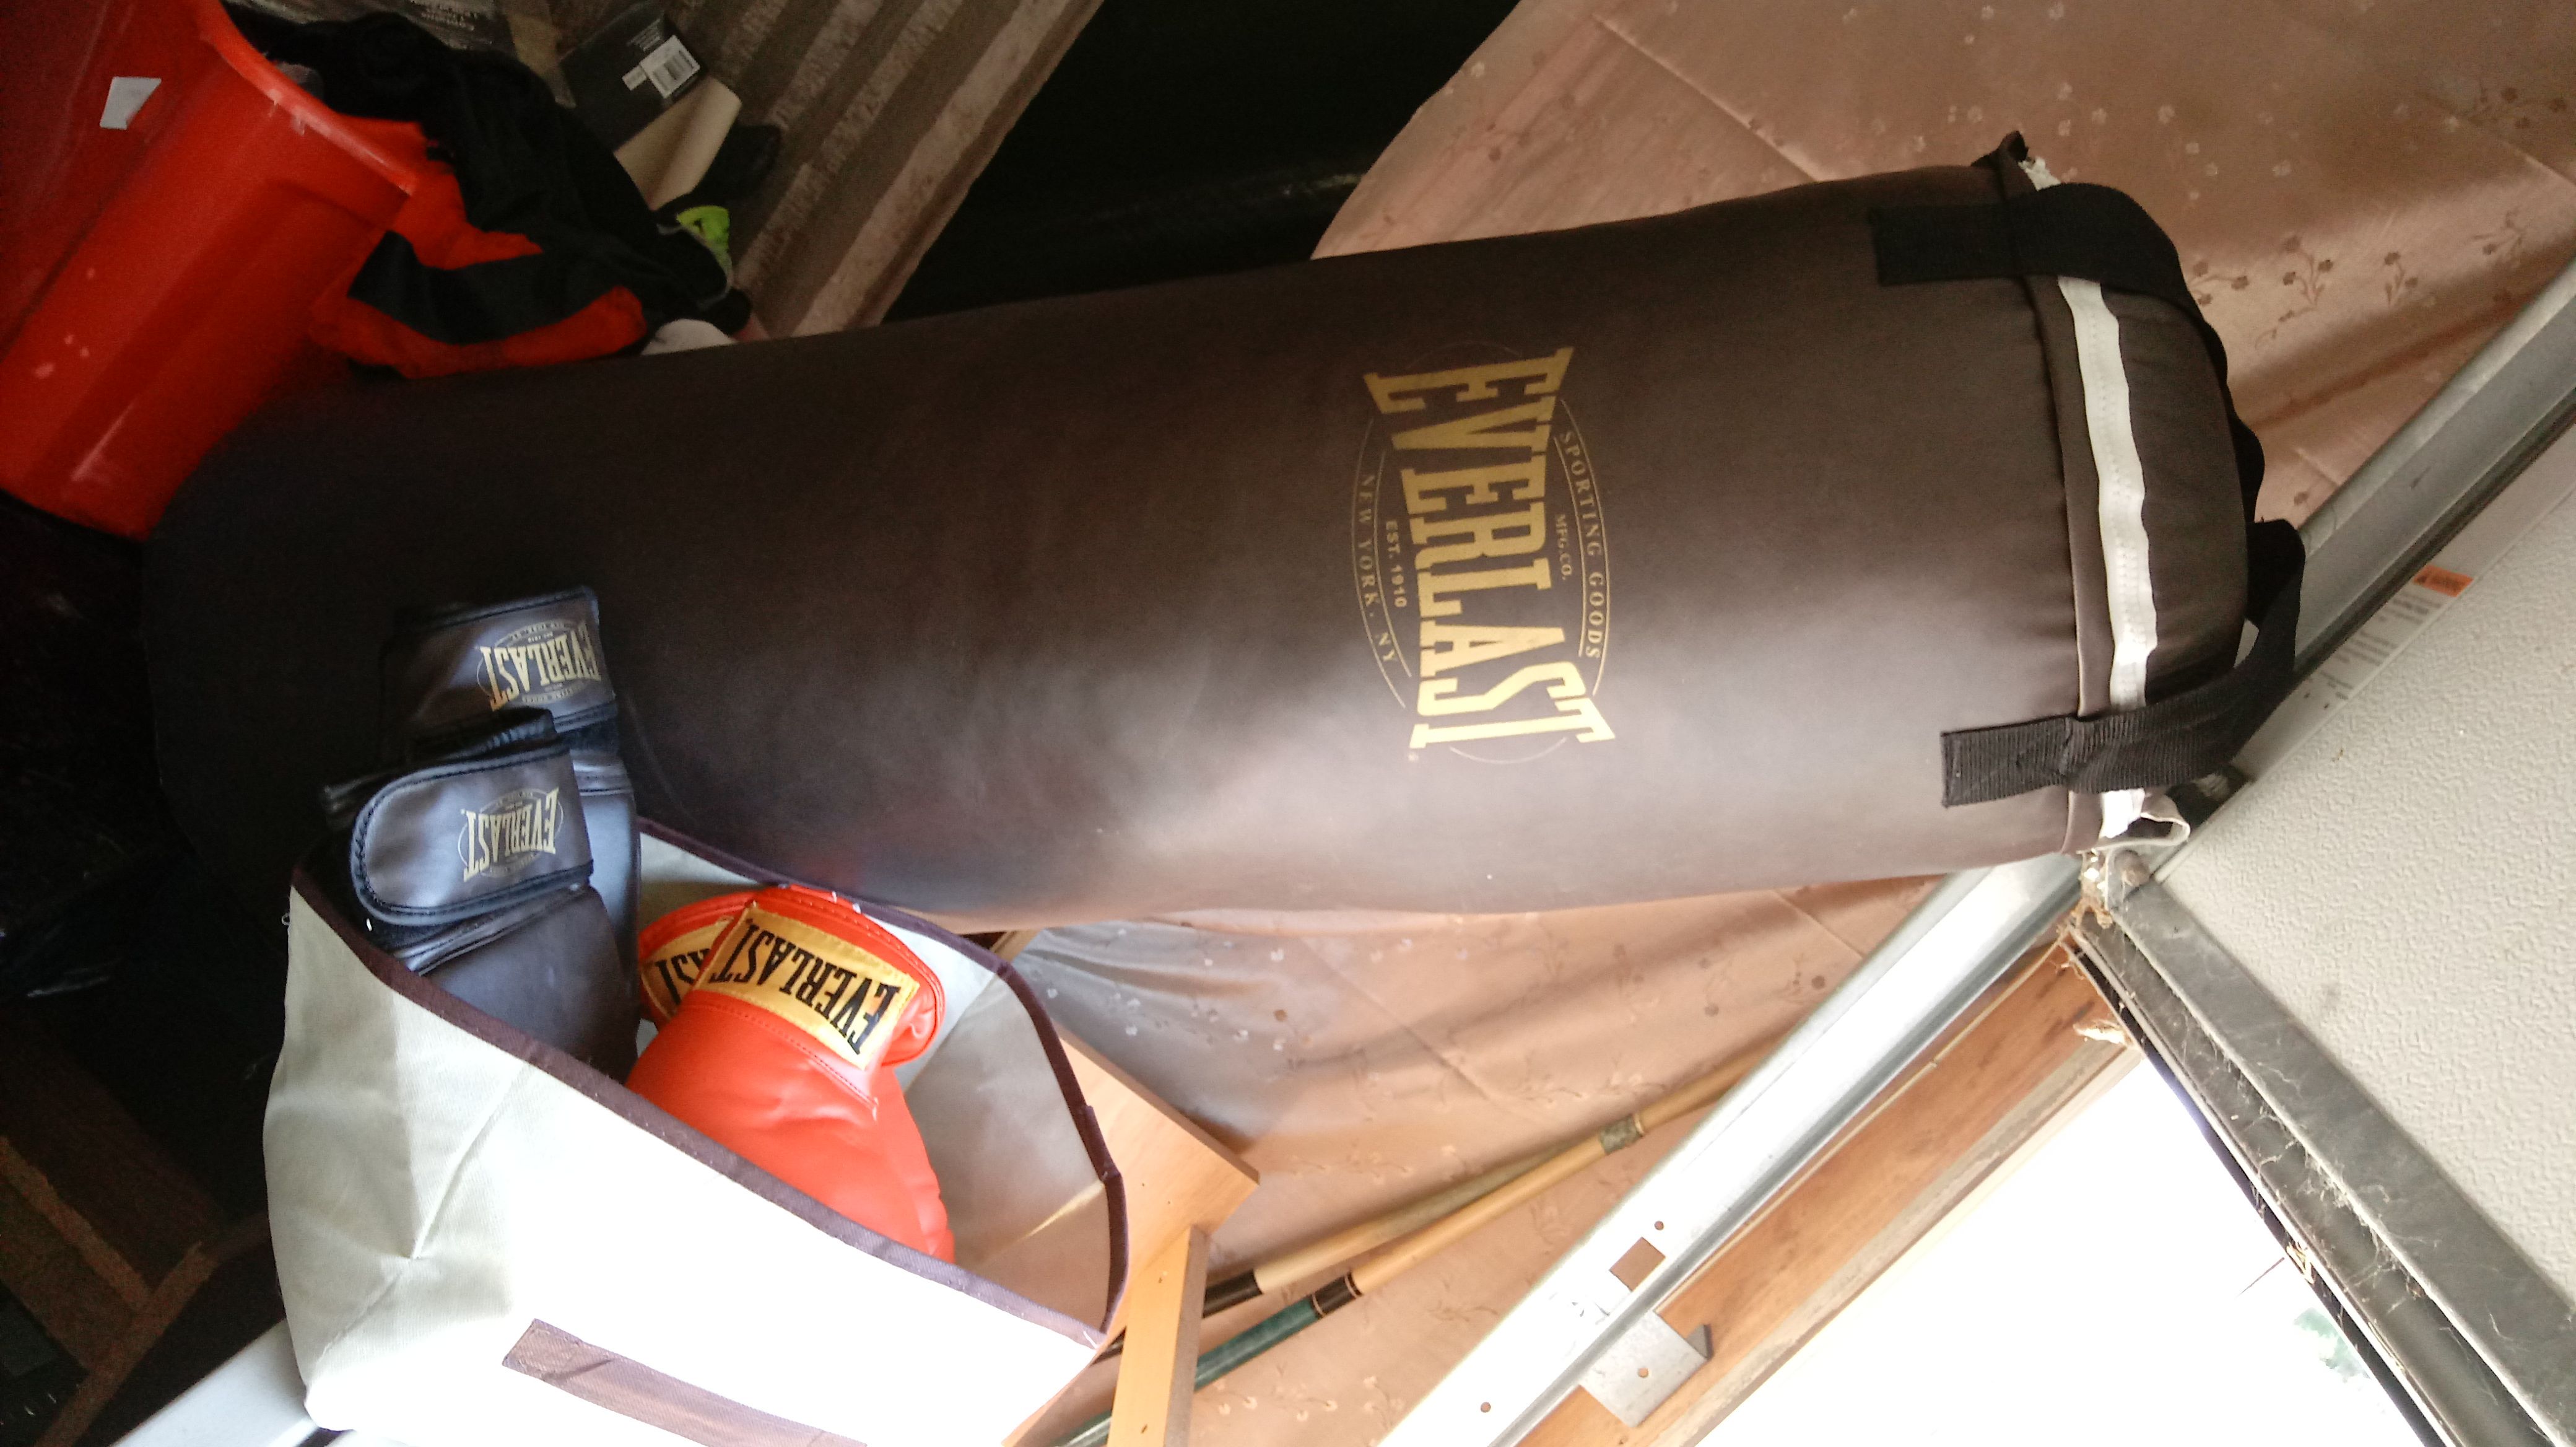 Everlast heavy bag with 2 sets of gloves